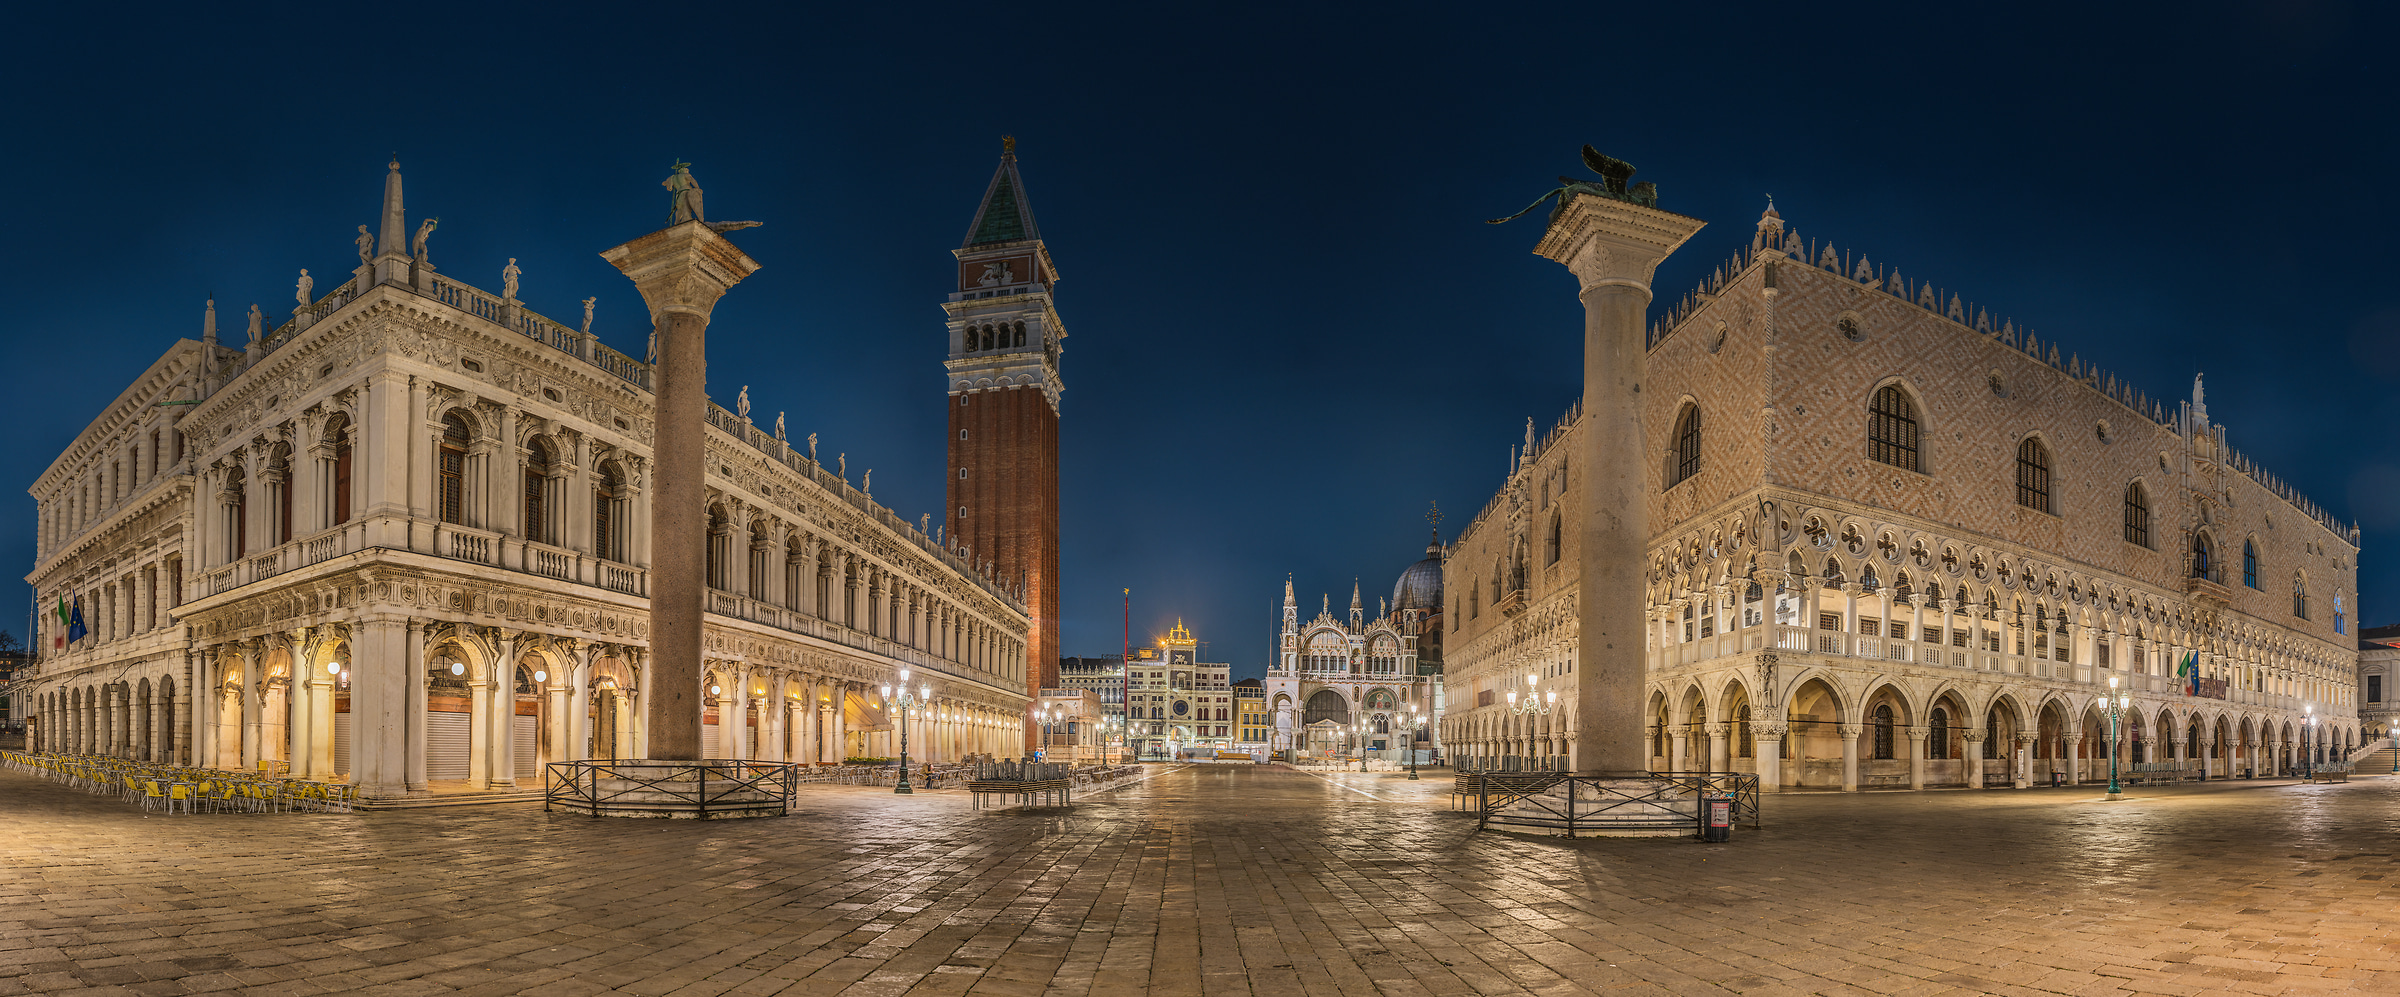 1,785 megapixels! A very high resolution, large-format VAST photo print of Piazza San Marco at night; panorama photograph created by Alfred Feil in Piazza San Marco, Venice, Italy.